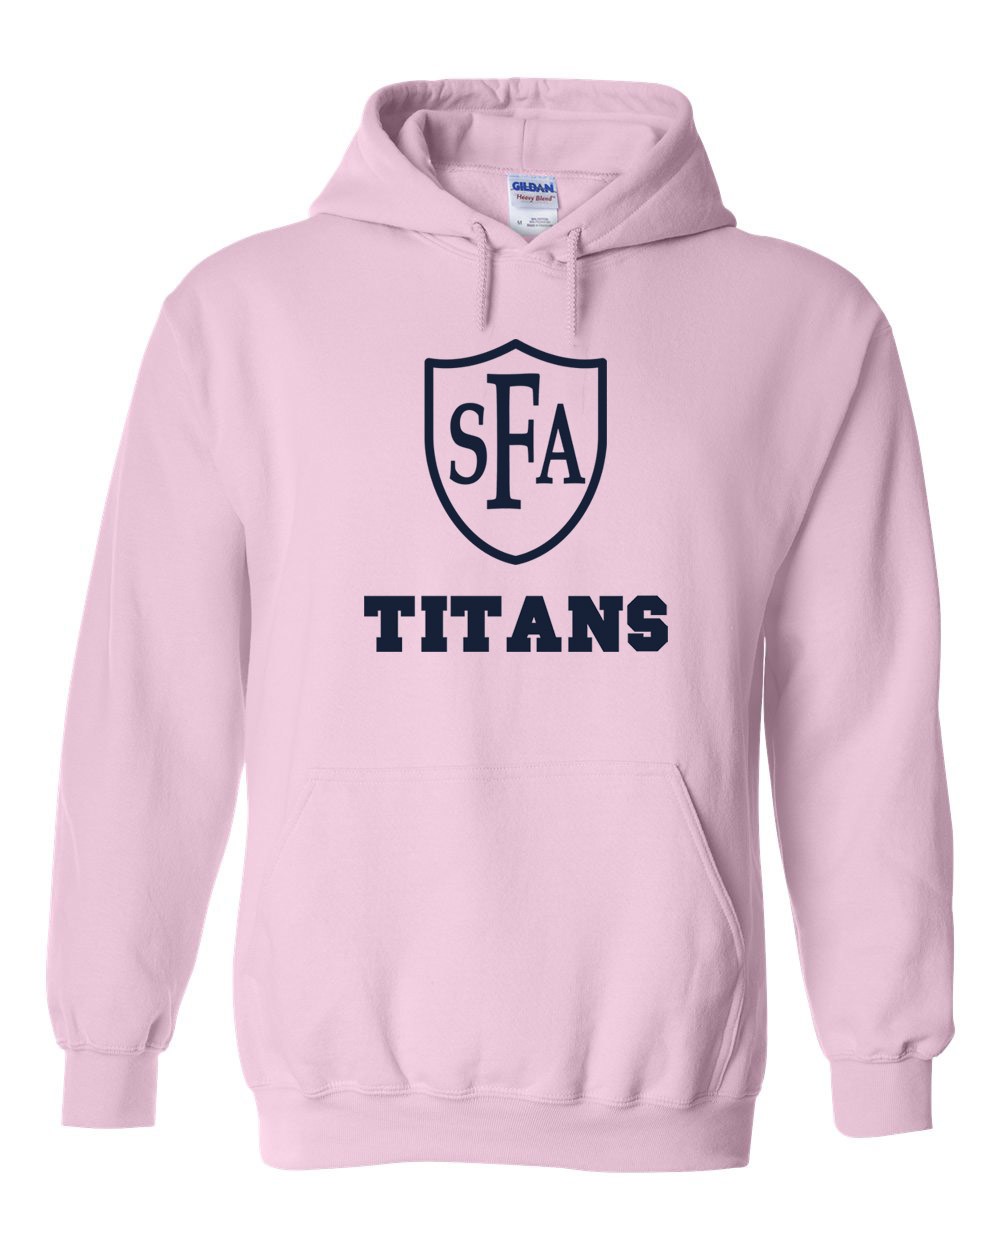 SFA Spirit Pullover Hoodie w/ Titan Logo - Please allow 2-3 Weeks for Delivery